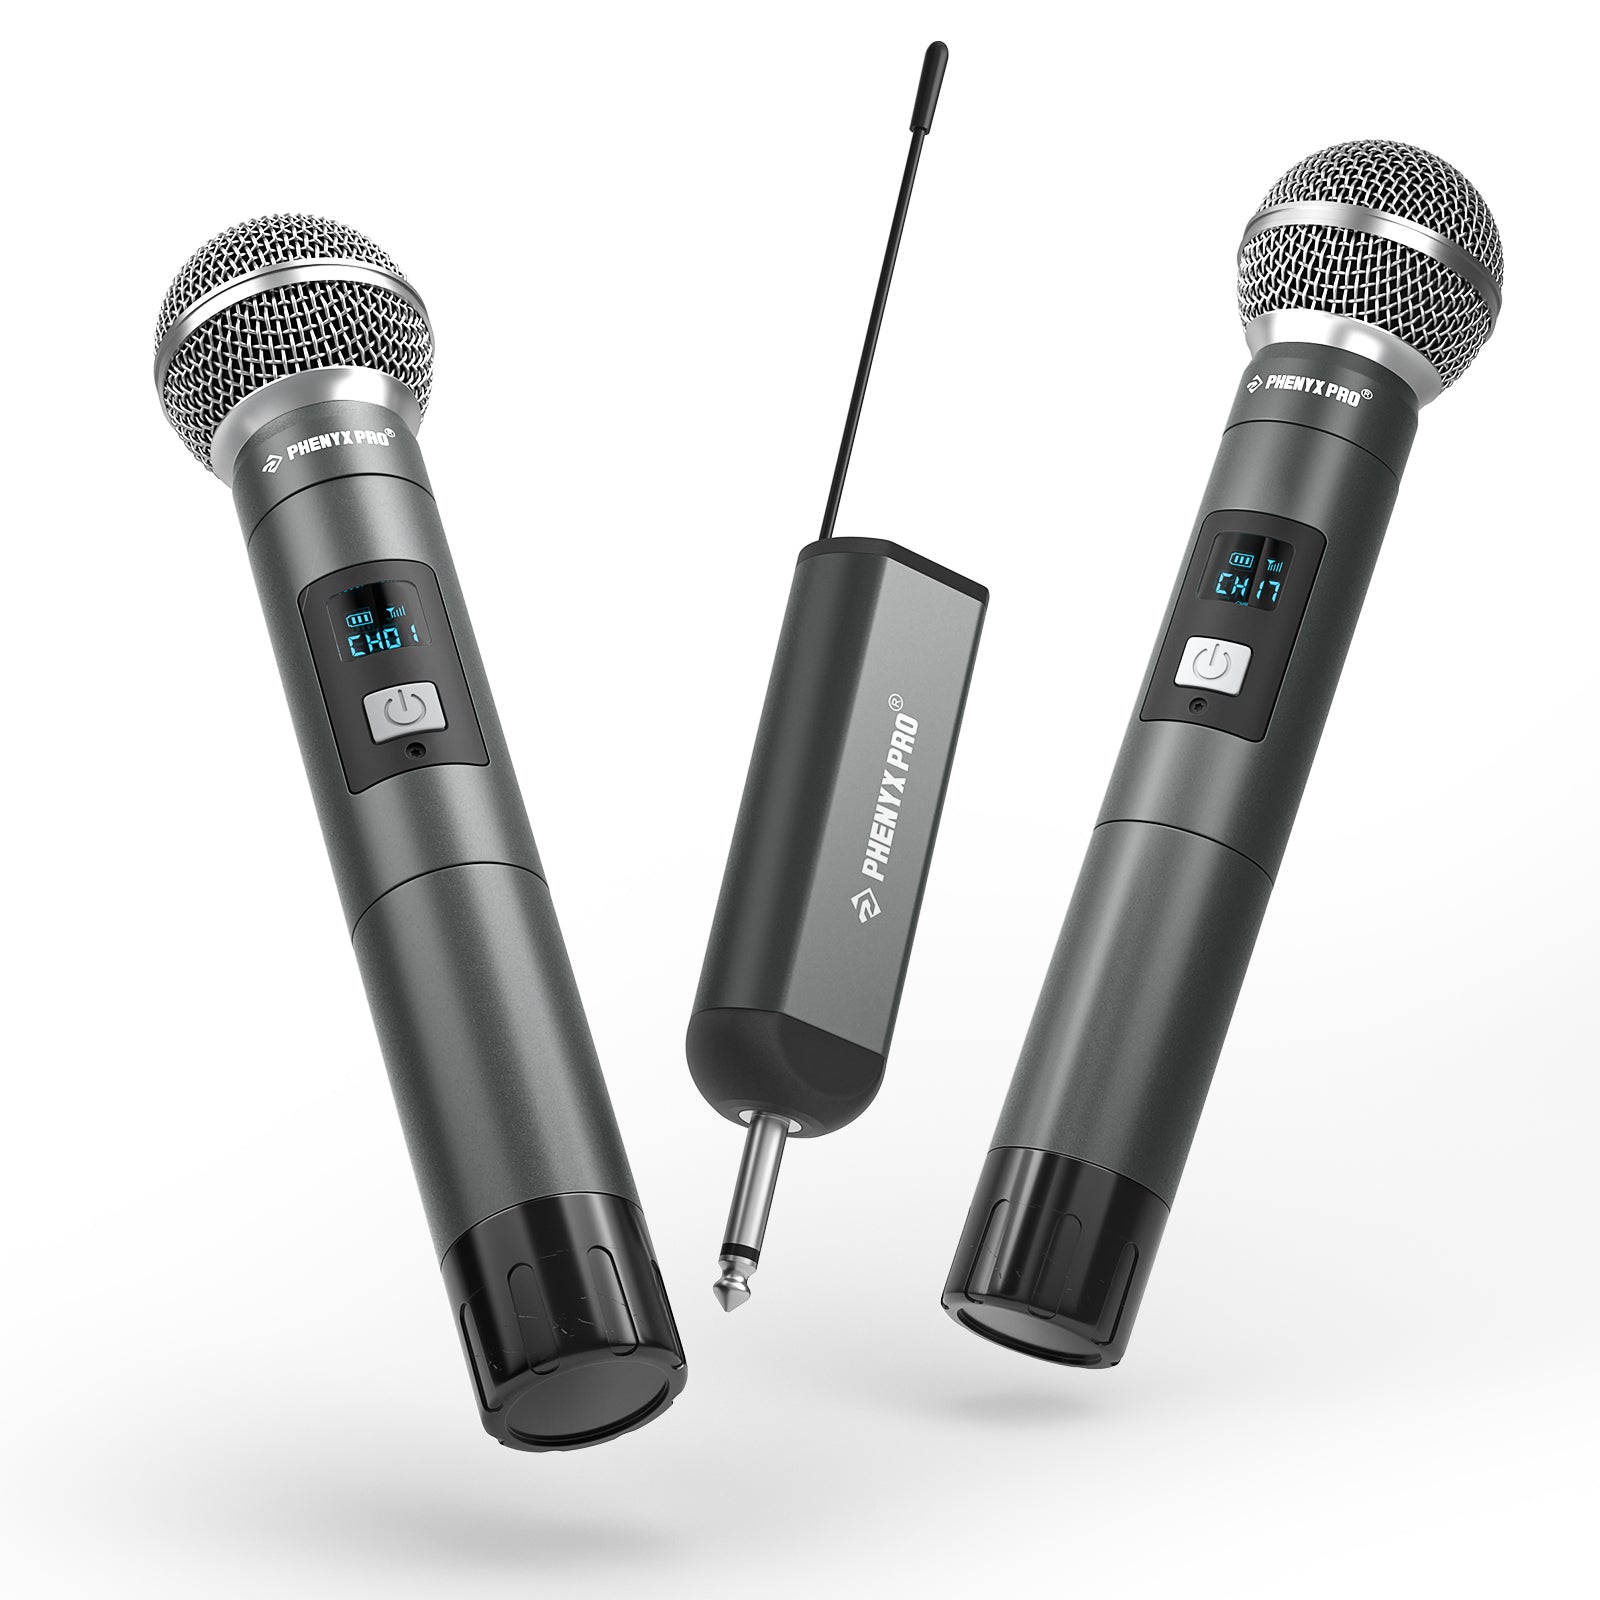 PDP-2-2H | Dual Digital Portable Wireless Microphone System